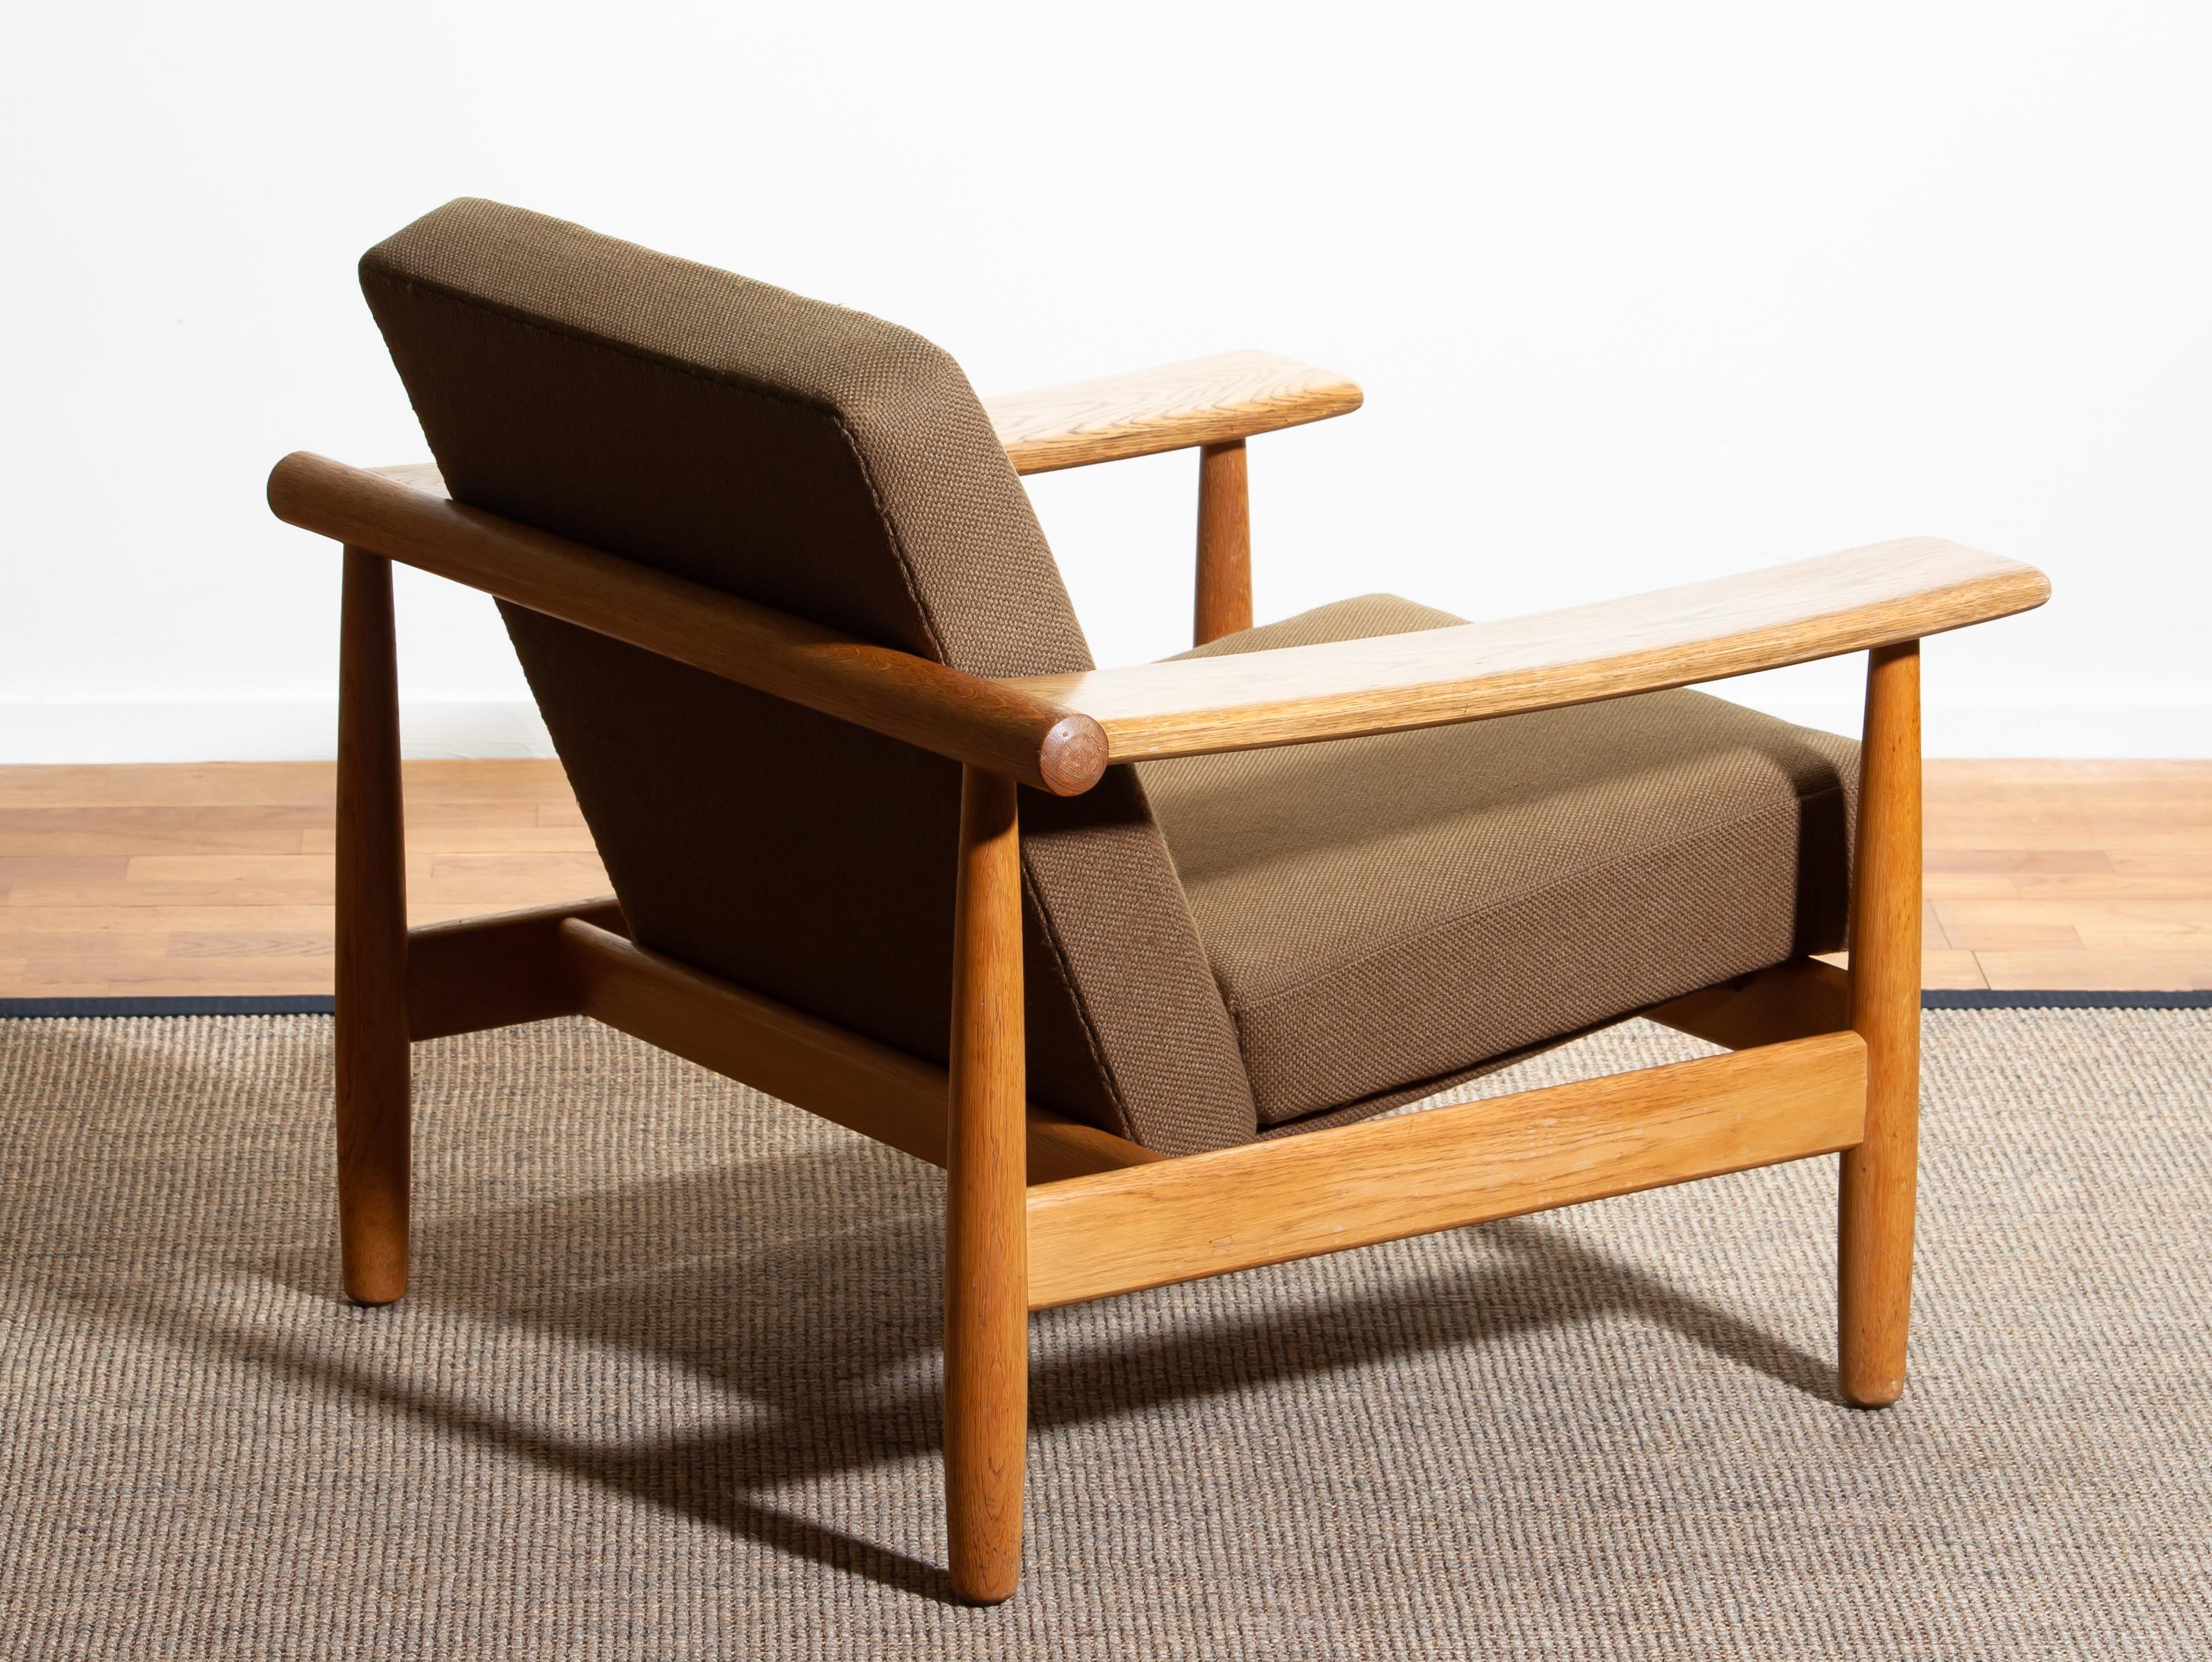 1960s, Oak Sofa and Lounge Chair or Living Room Set from Denmark 1